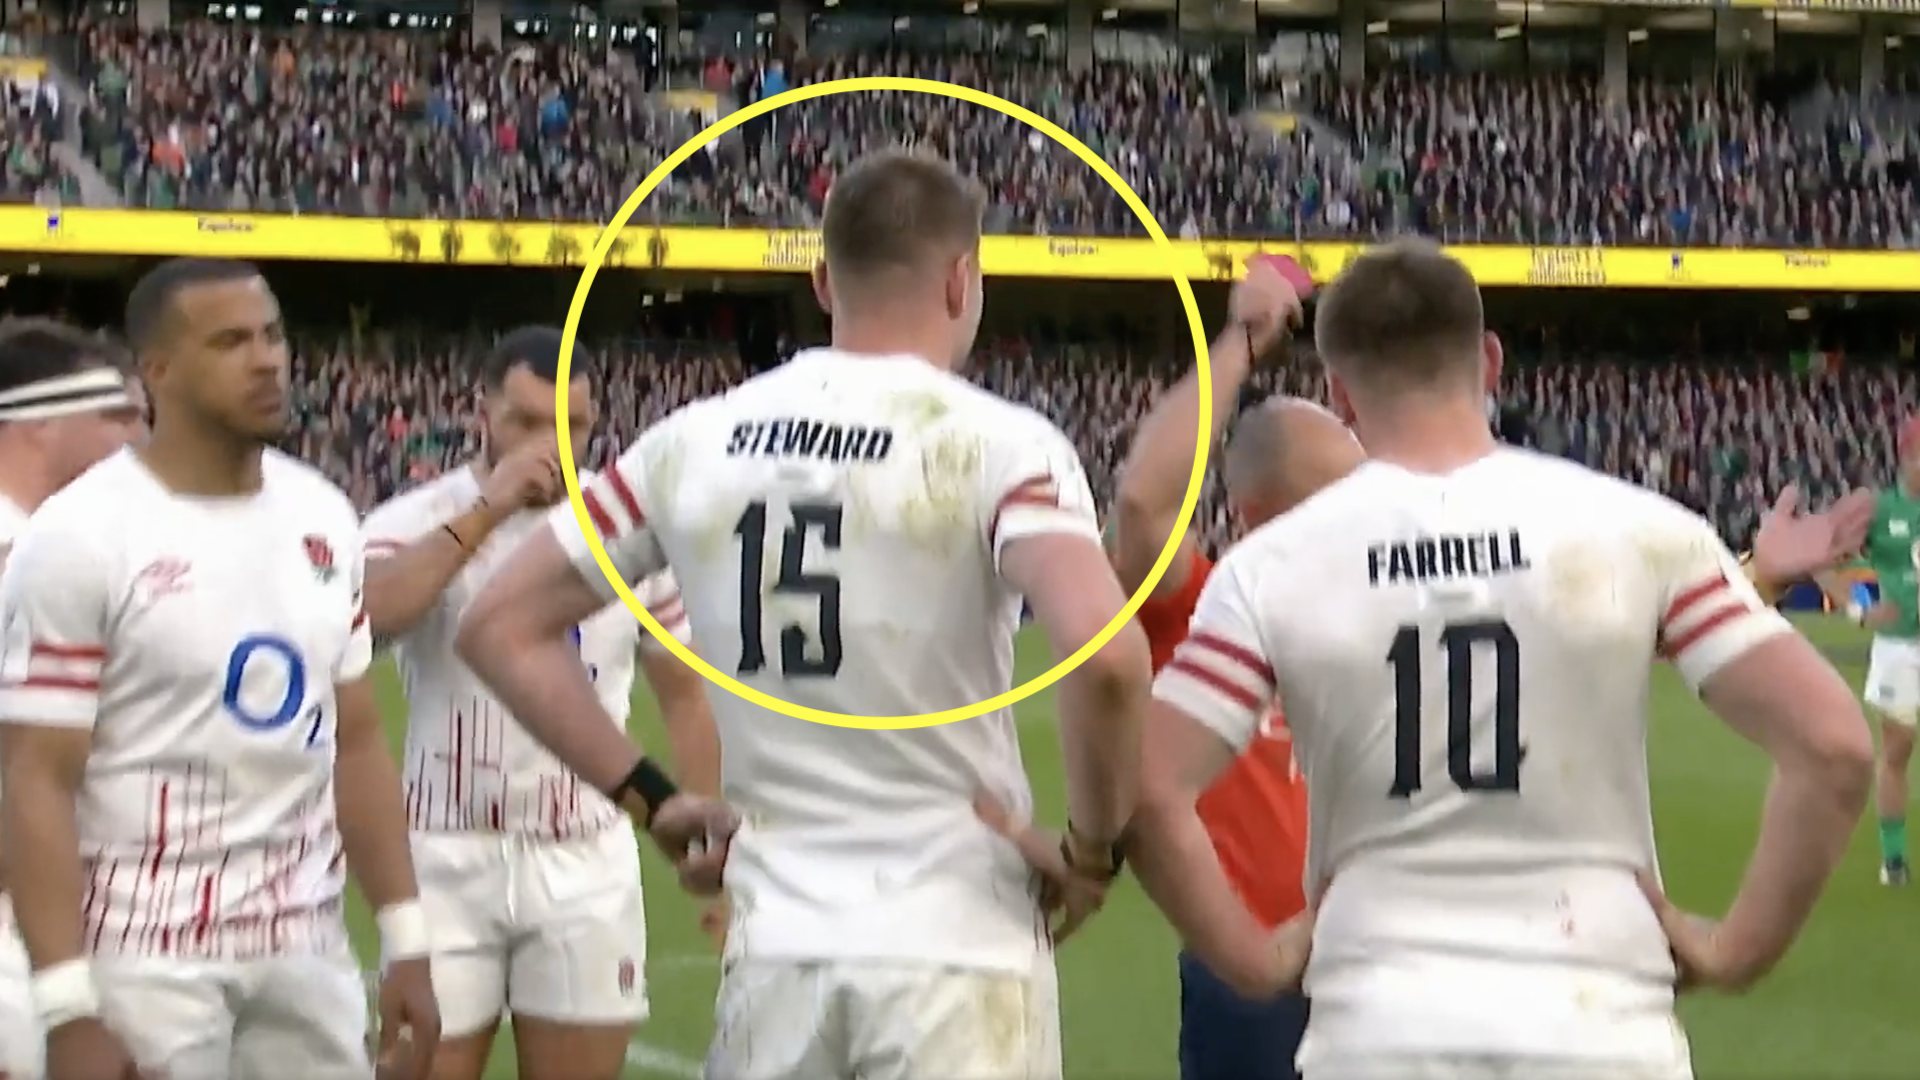 'Let's start playing touch'- England red card creates social media storm